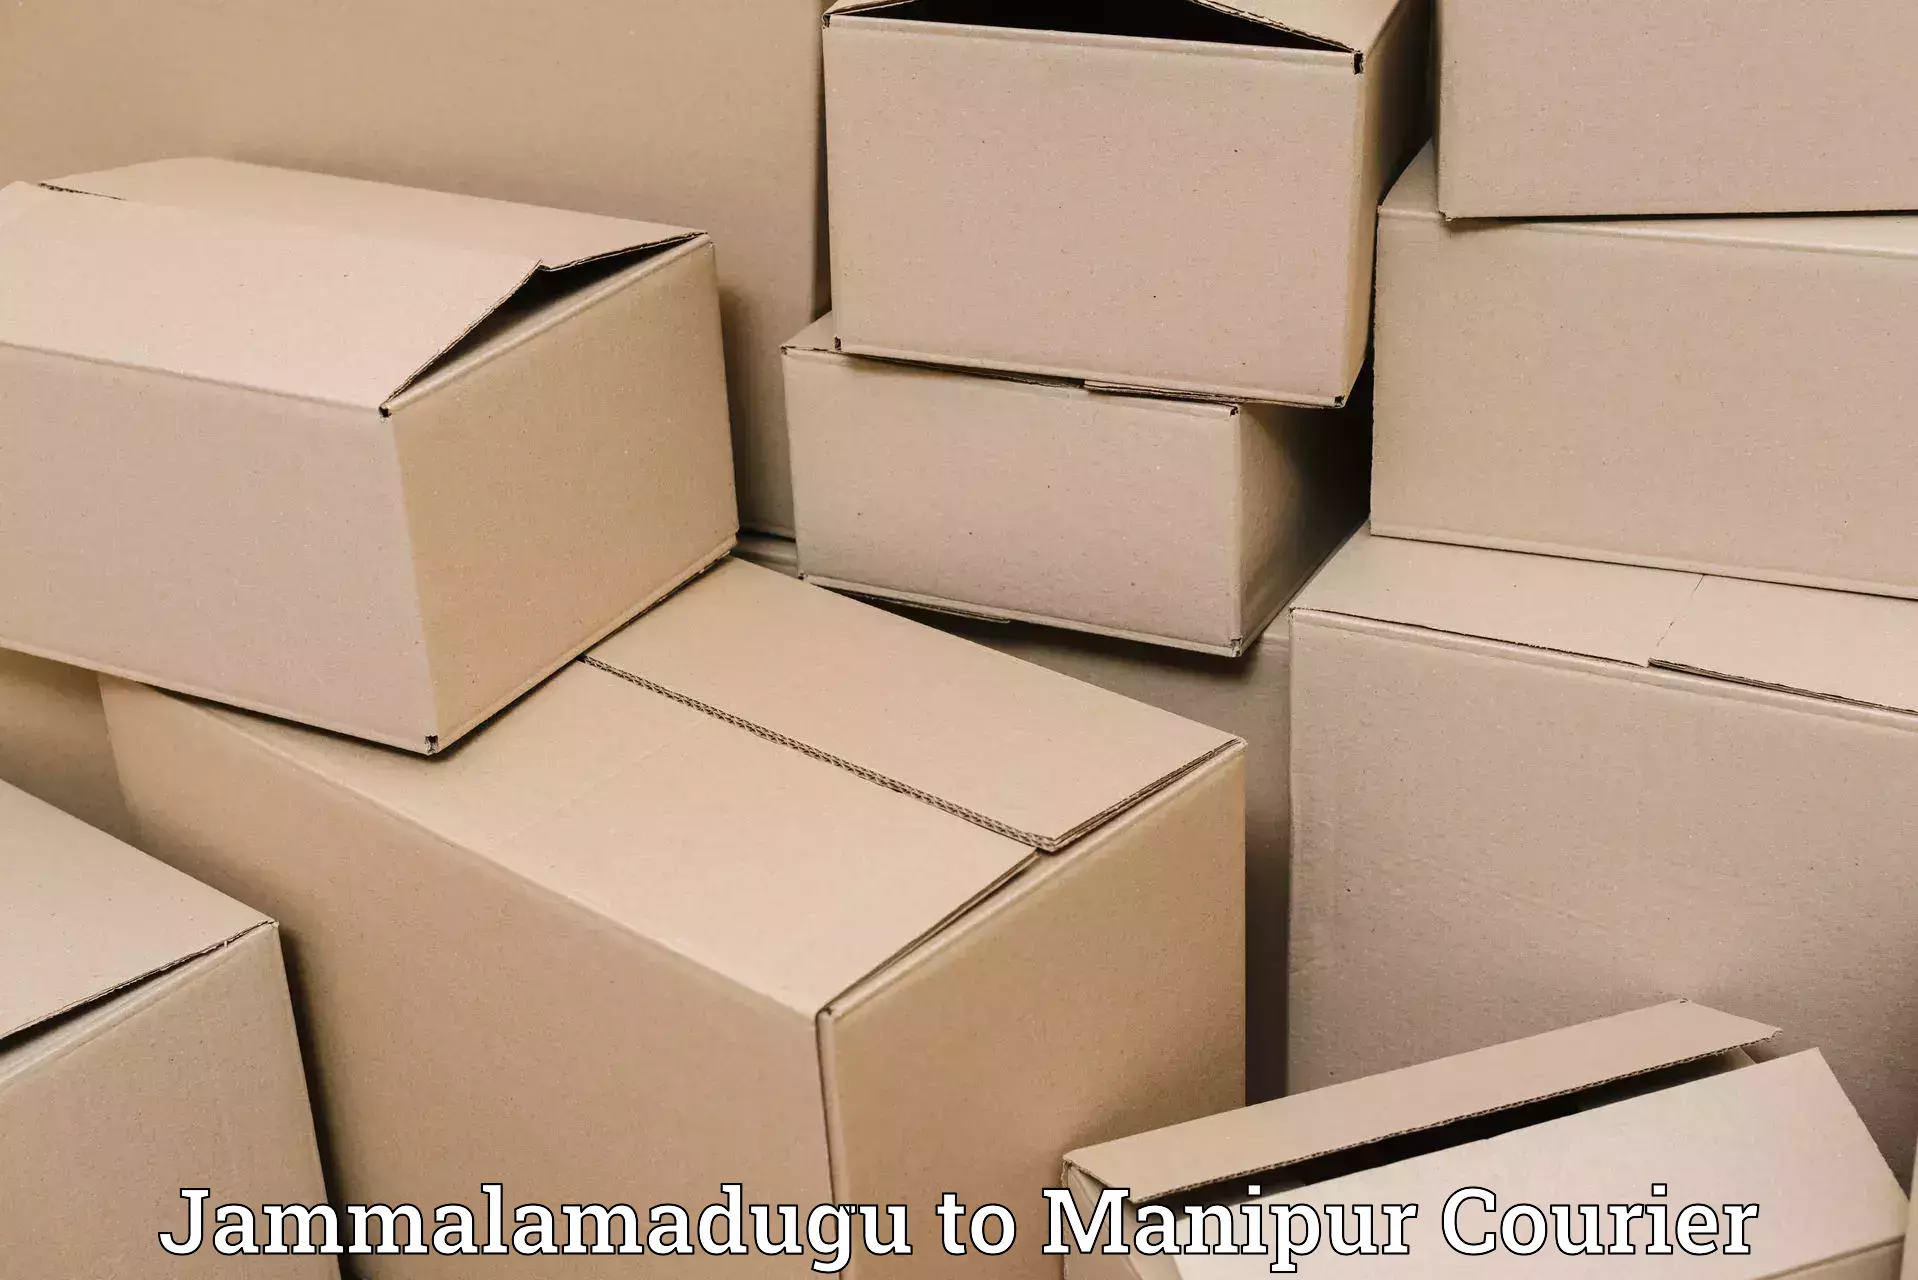 Reliable delivery network Jammalamadugu to Manipur